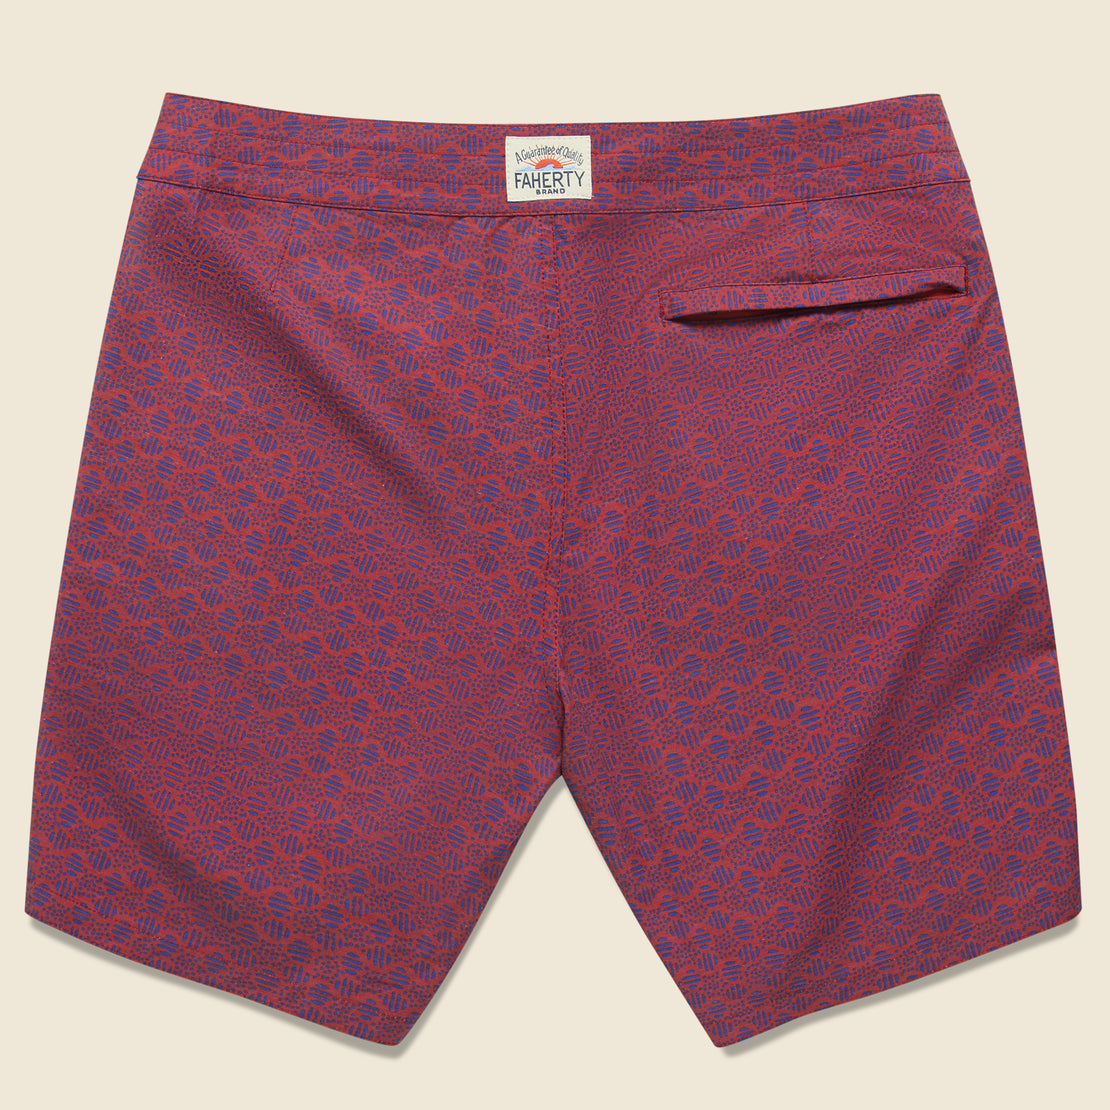 Classic 7" Boardshort - Etched Circle Red - Faherty - STAG Provisions - Shorts - Swim